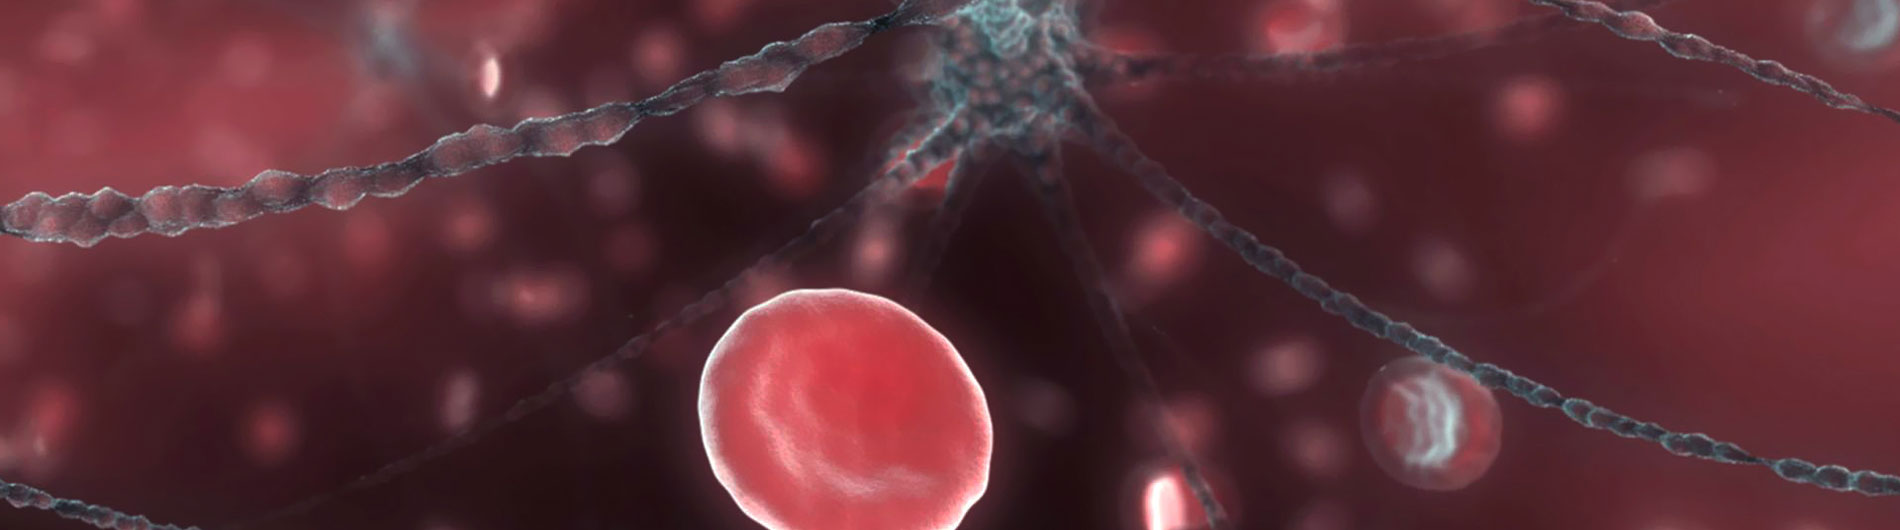 Neurons and Red Blood Cells Photo